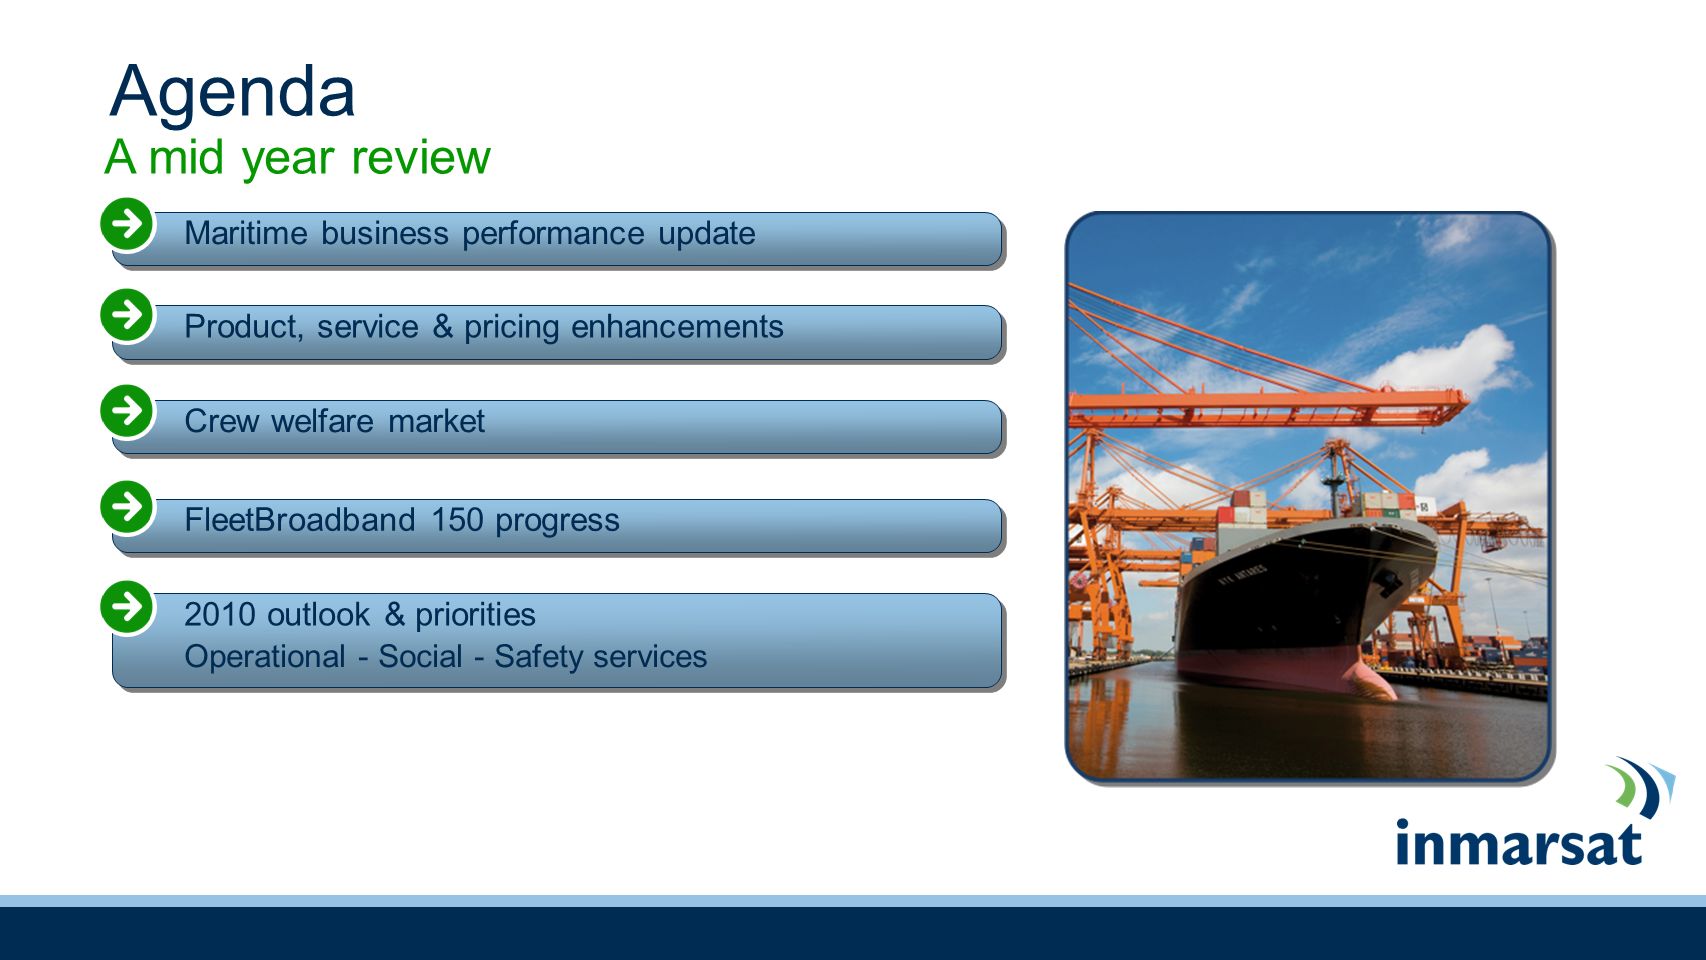 Agenda Maritime business performance update A mid year review Product, service & pricing enhancements Crew welfare market FleetBroadband 150 progress 2010 outlook & priorities Operational - Social - Safety services